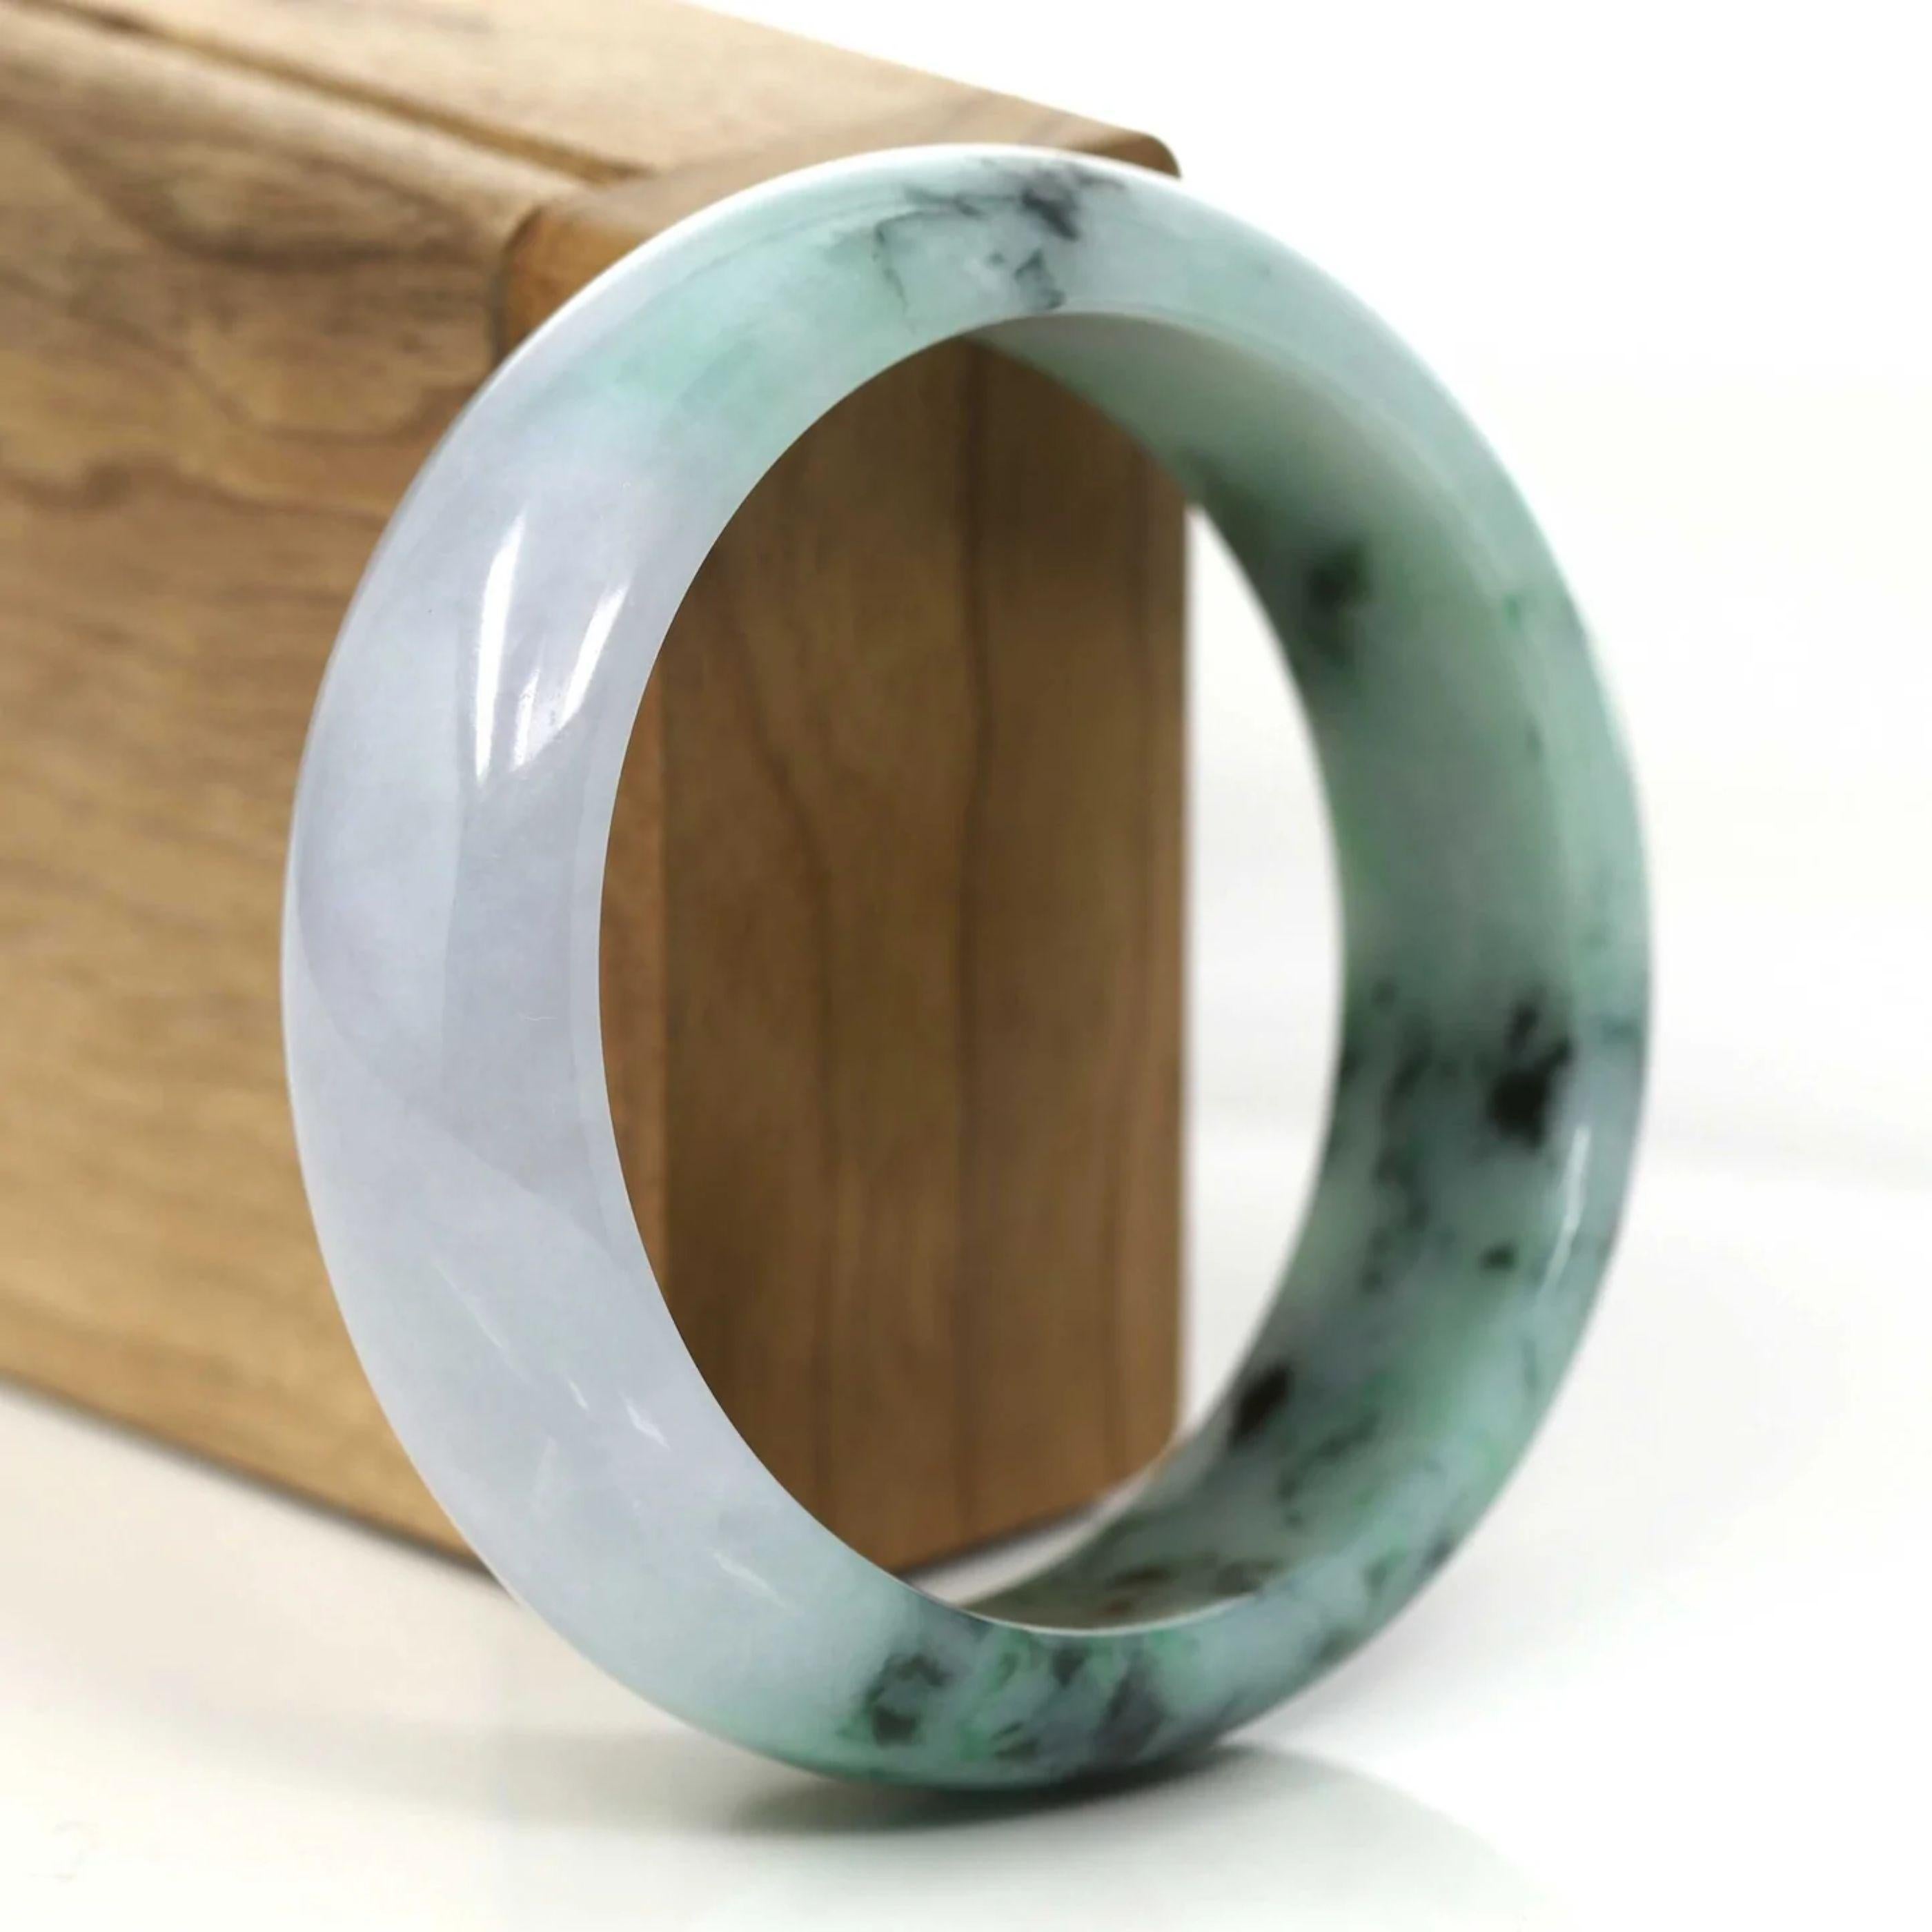 * DETAILS--- Genuine Burmese Jadeite Jade Bangle Bracelet. This bangle is made with very high-quality genuine Burmese Jadeite jade. The jade texture is fine and smooth with nice purple-lavender green color throughout the whole bangle. It looks so